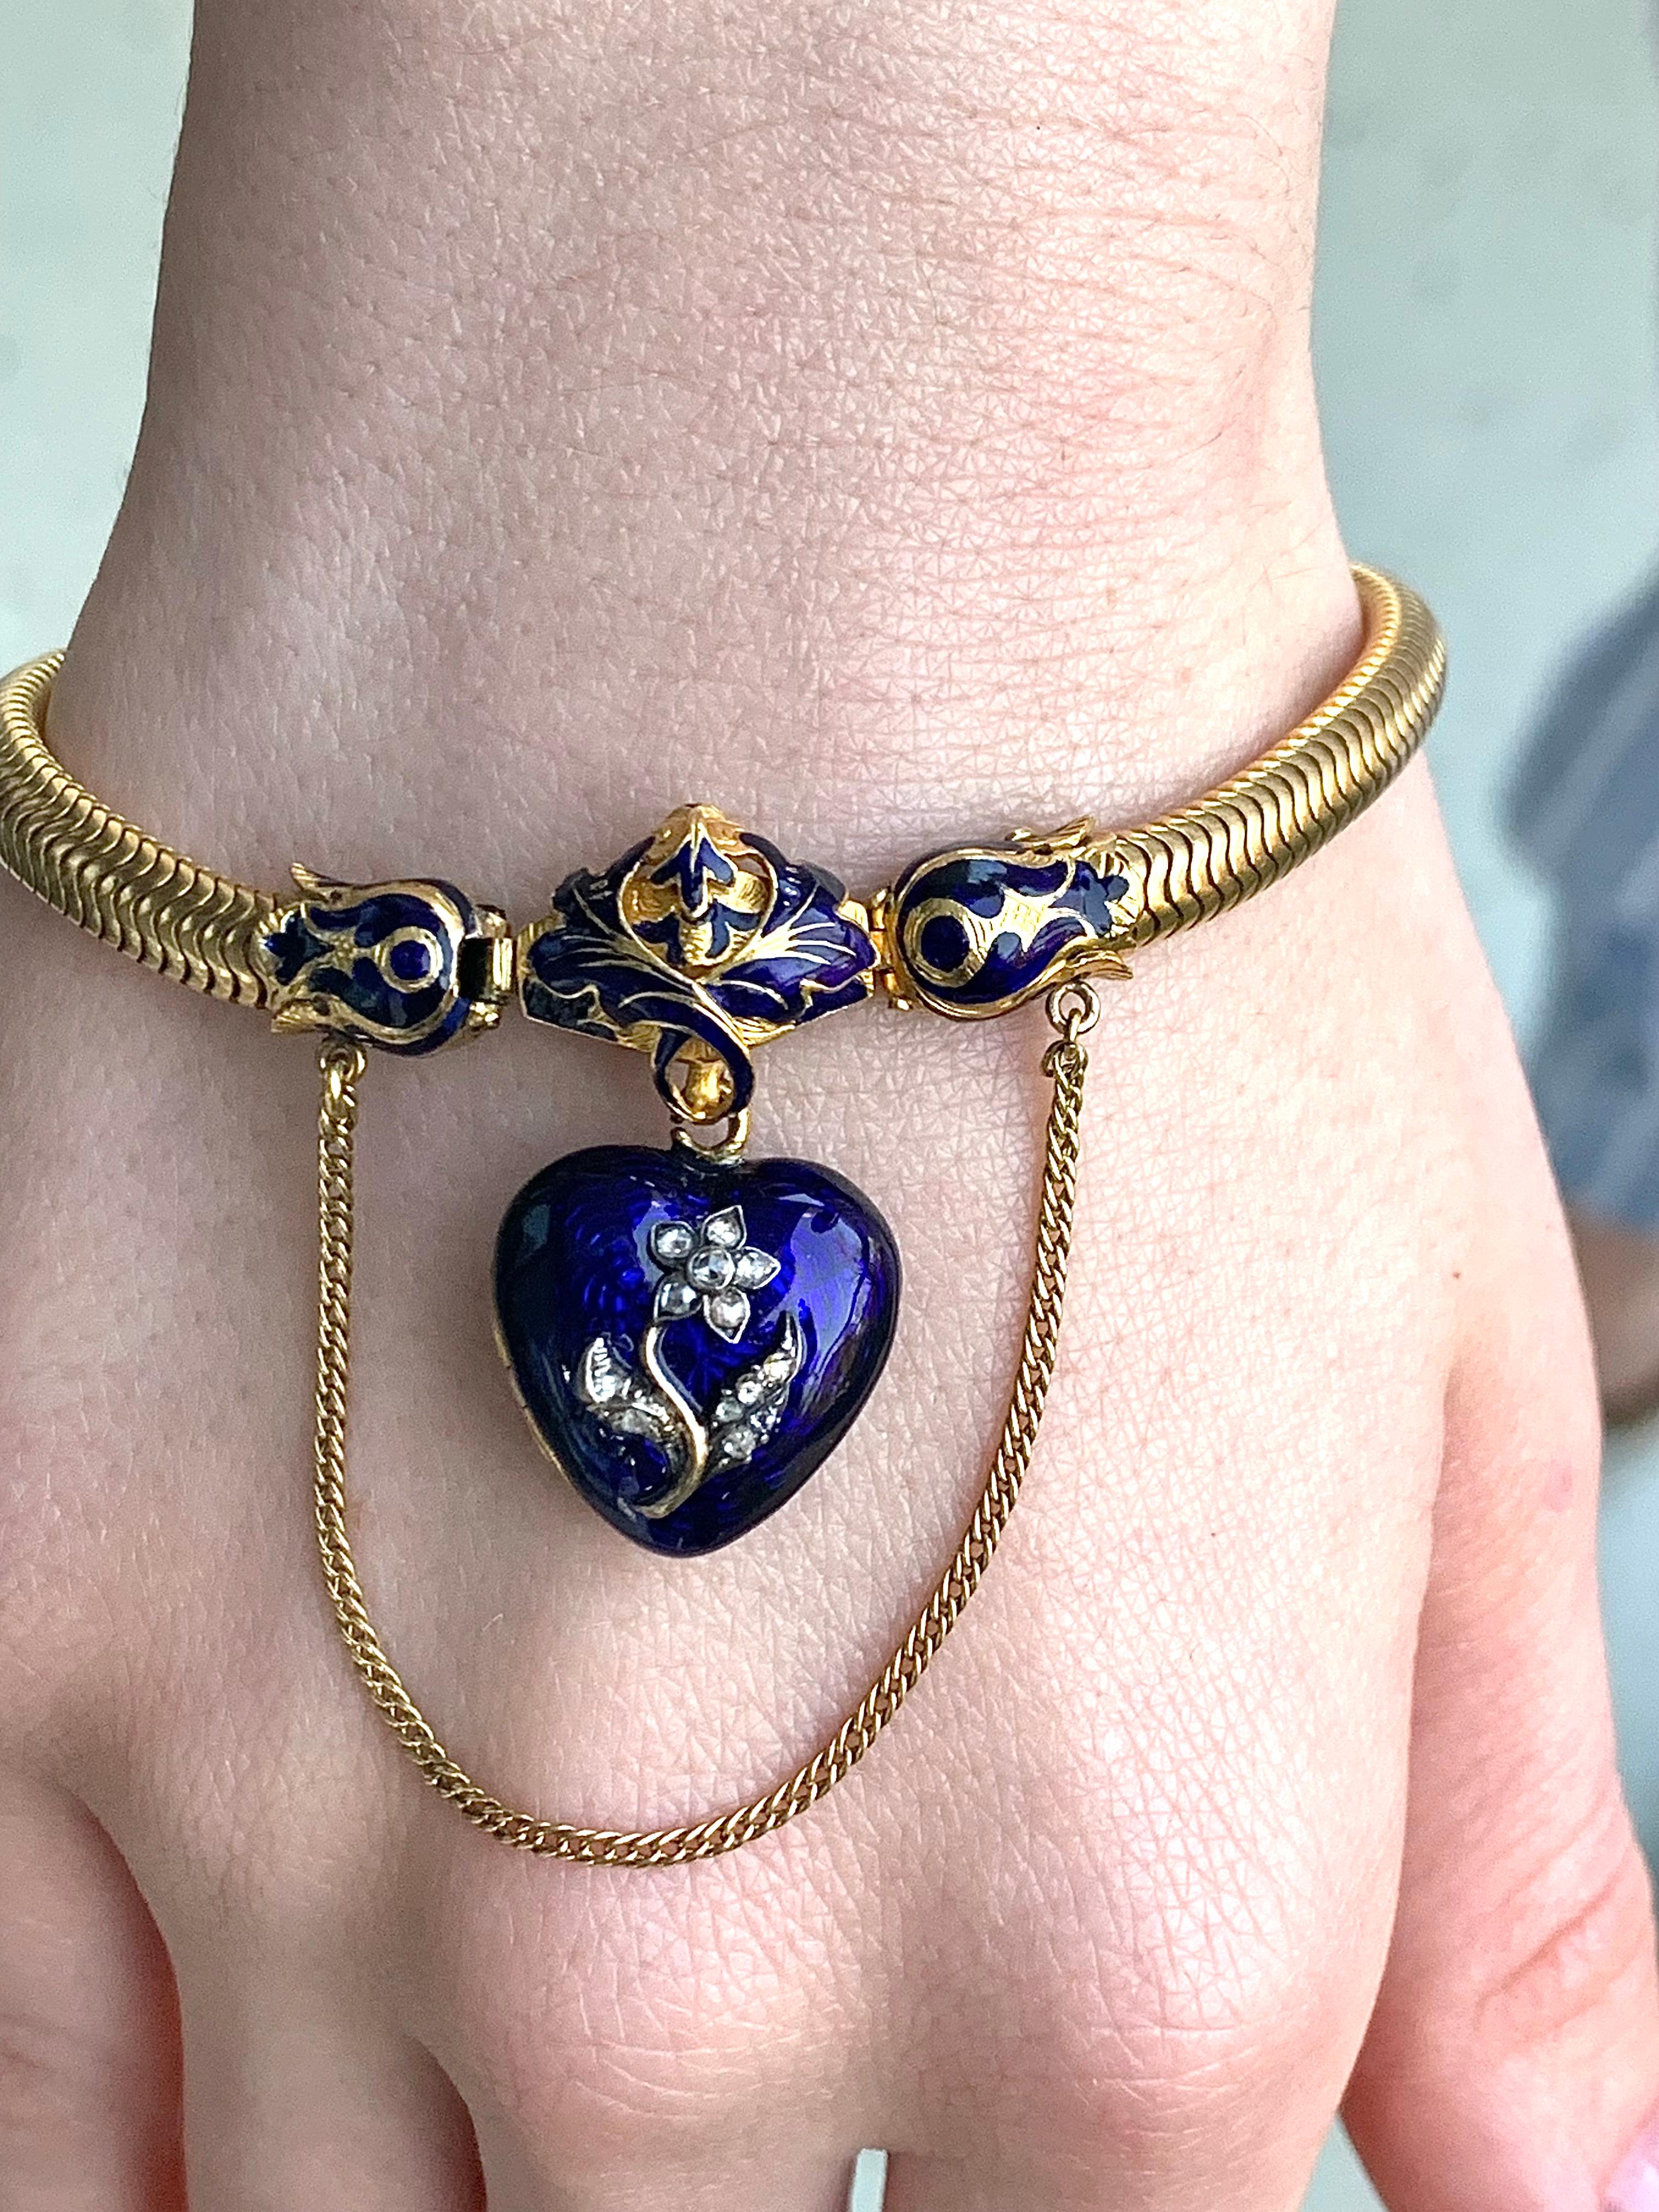 This flexible bracelet was hand crafted out of 18 karat gold in the middle of the. 19th century. The ends of the articulated gold braceletd terminate in a  blue enamelled clasp. A blue enamelled heart with locket back is decorated with a diamond set